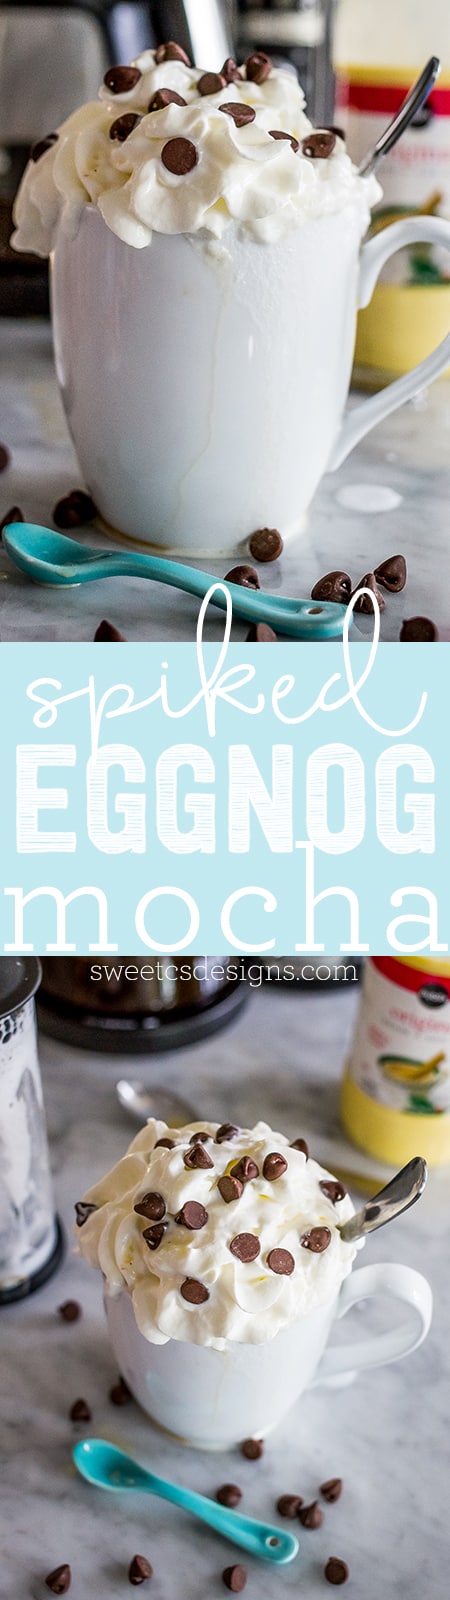 Spiked Eggnog Mocha- love this delicious take on a festive coffee drink!